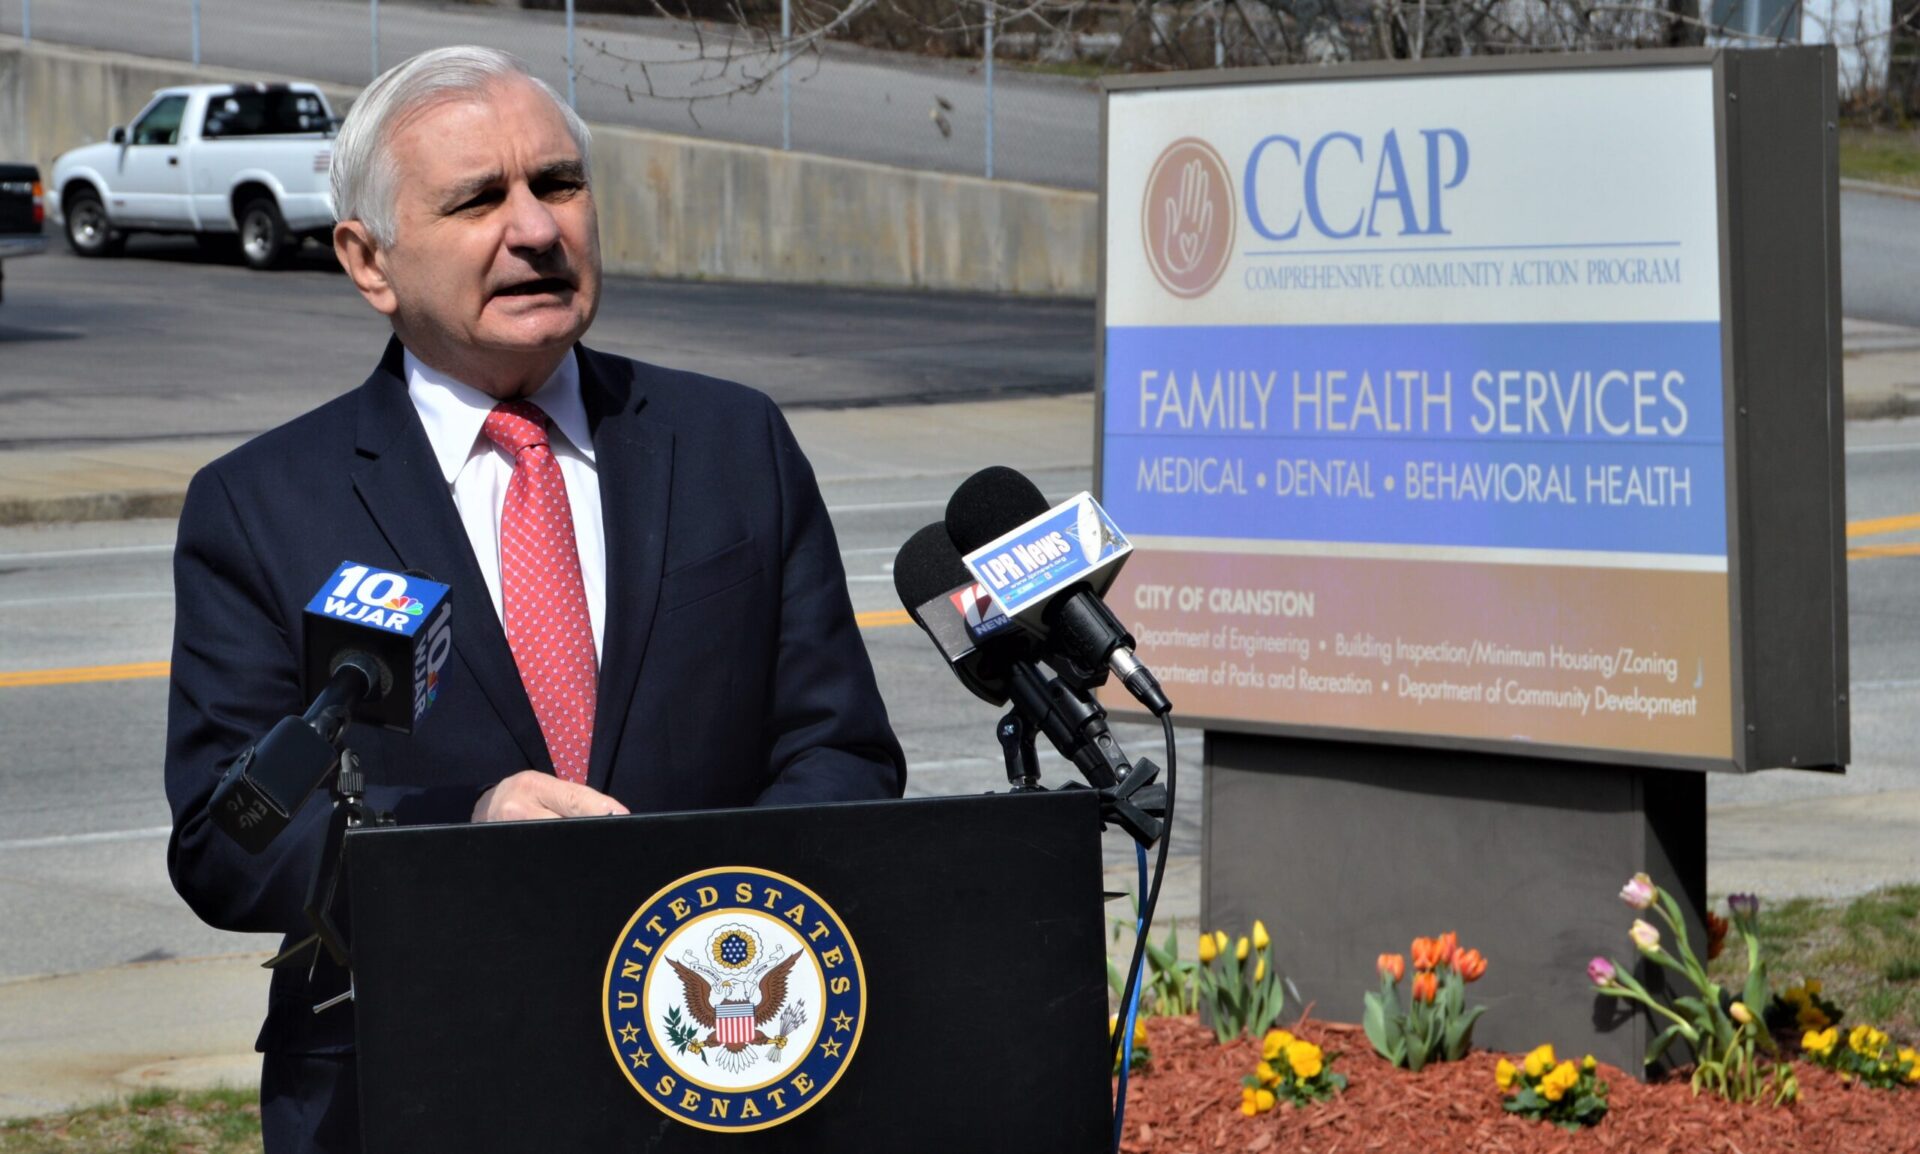 [CREDIT: Sen. Reed's office] Sen. Jack Reed speaks at CCAP, 311 Doric Ave, Cranston, about the need for increasing underserved communities' access to the COVID-19 vaccine.